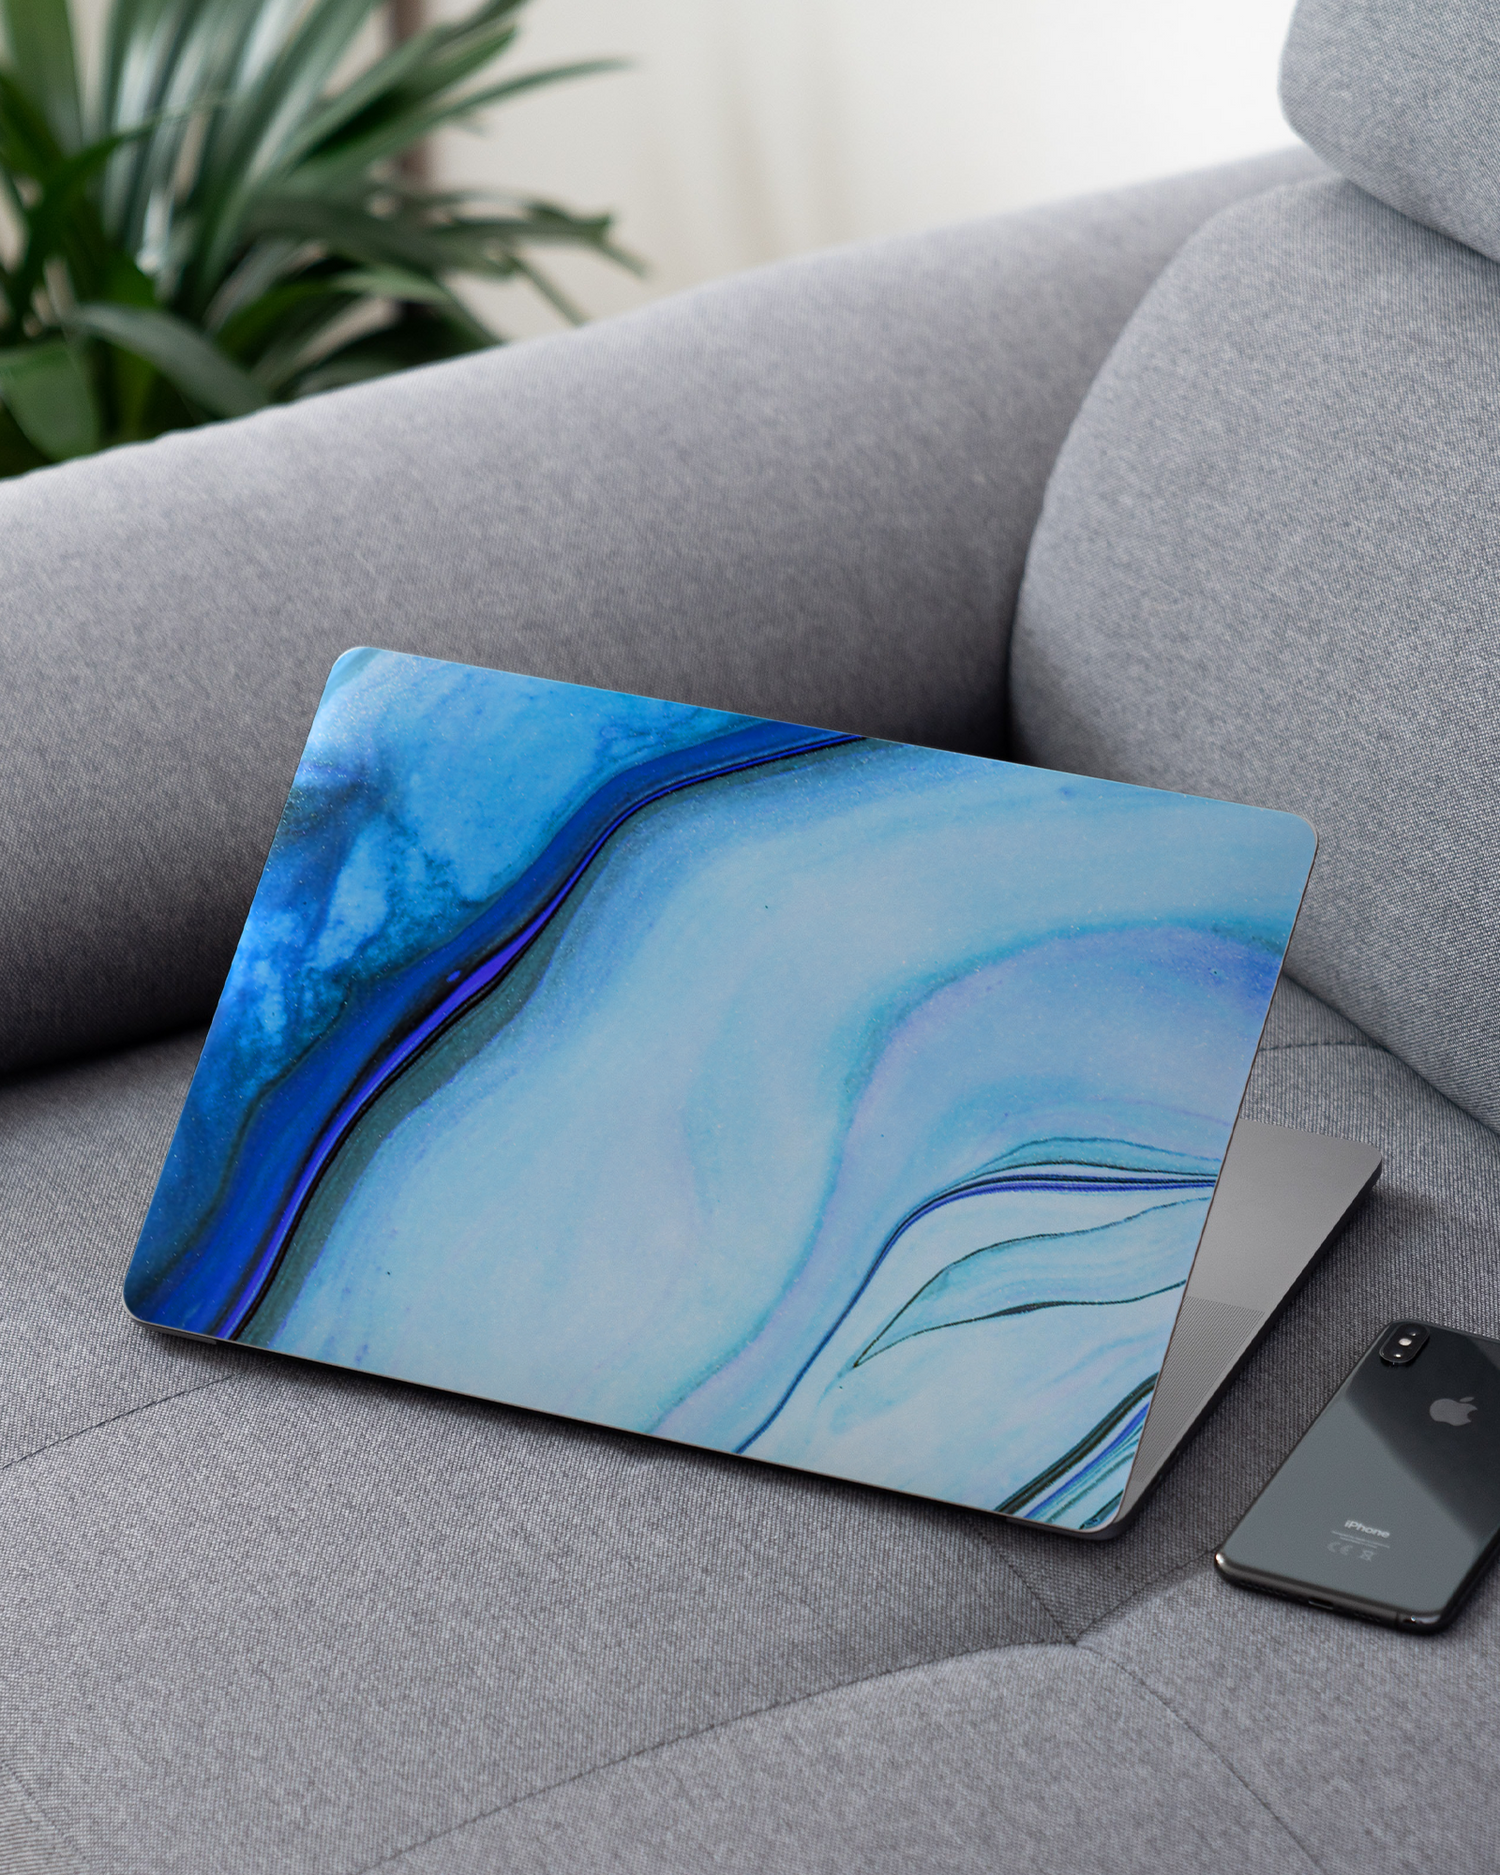 Cool Blues Laptop Skin for 13 inch Apple MacBooks on a couch